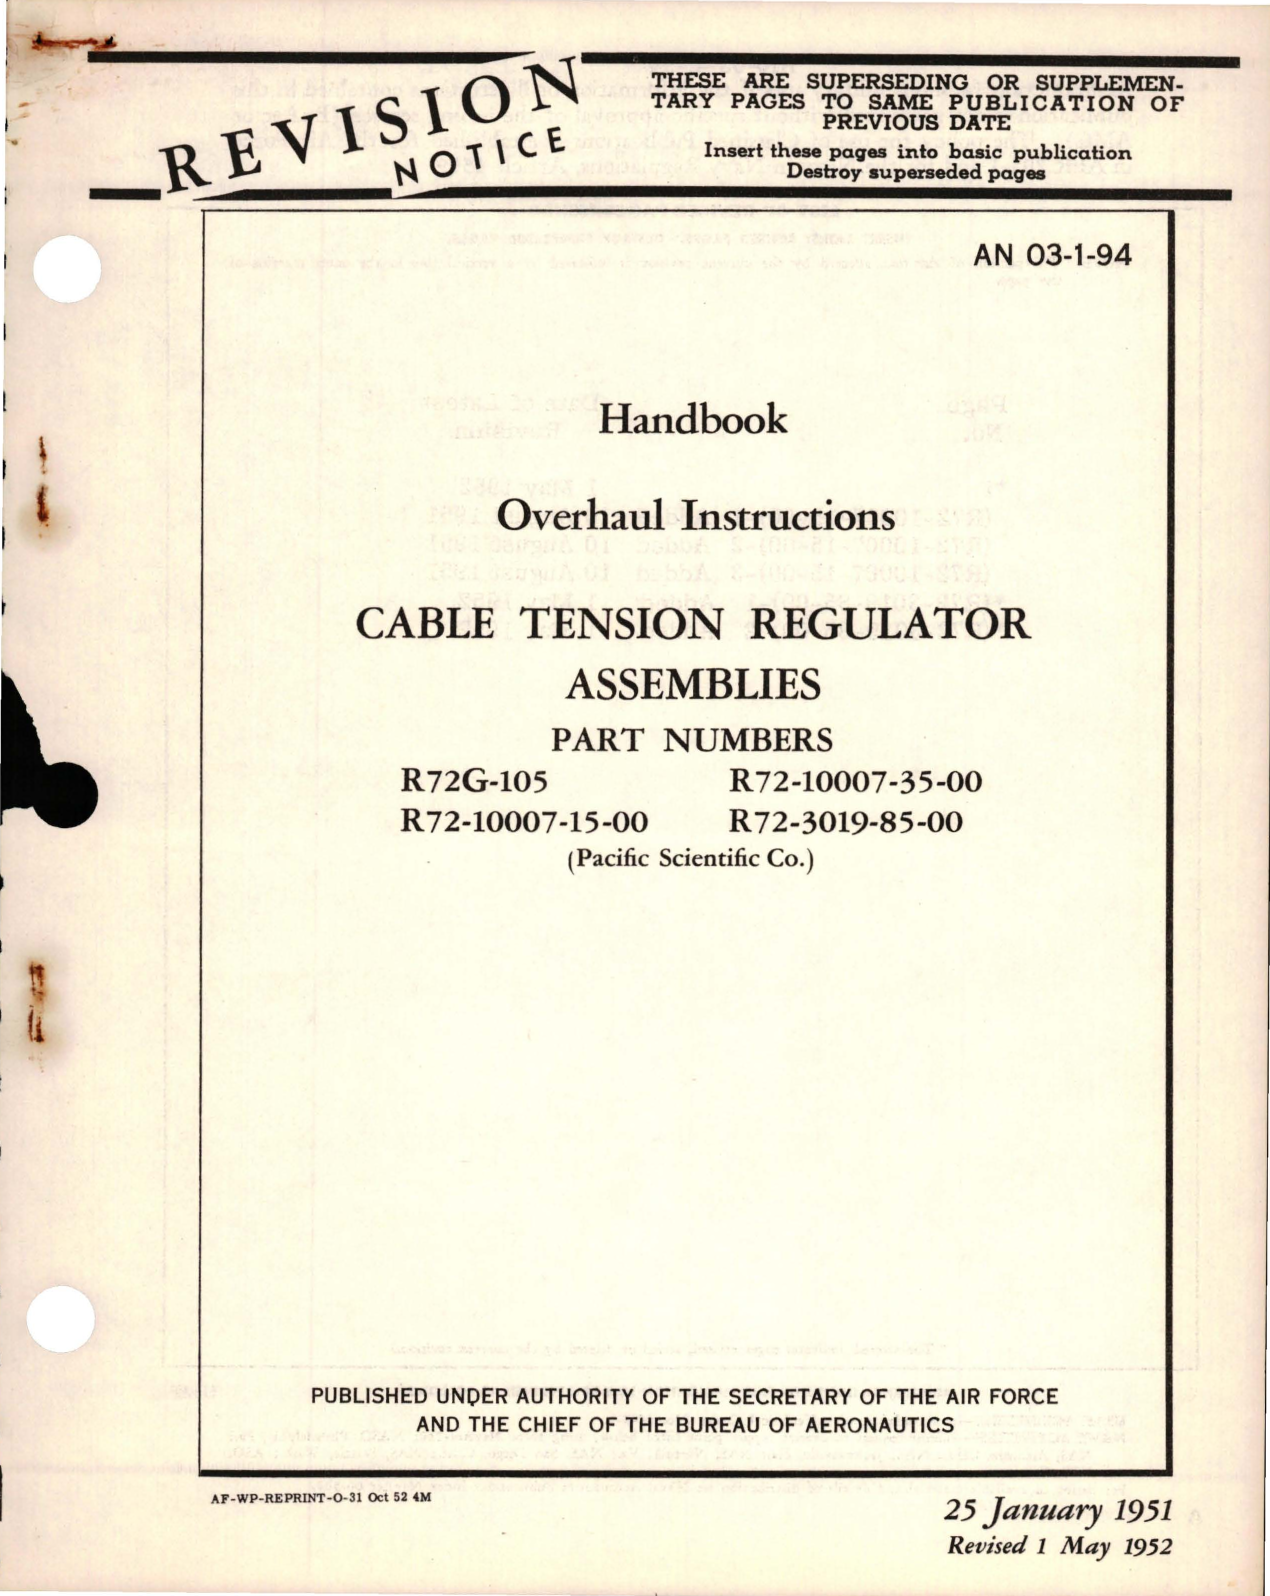 Sample page 1 from AirCorps Library document: Overhaul Instructions for Cable Tension Regulator Assemblies -  R72G-105, R72-10007-15-00, R72-10007-35-00, and R72-3019-85-00